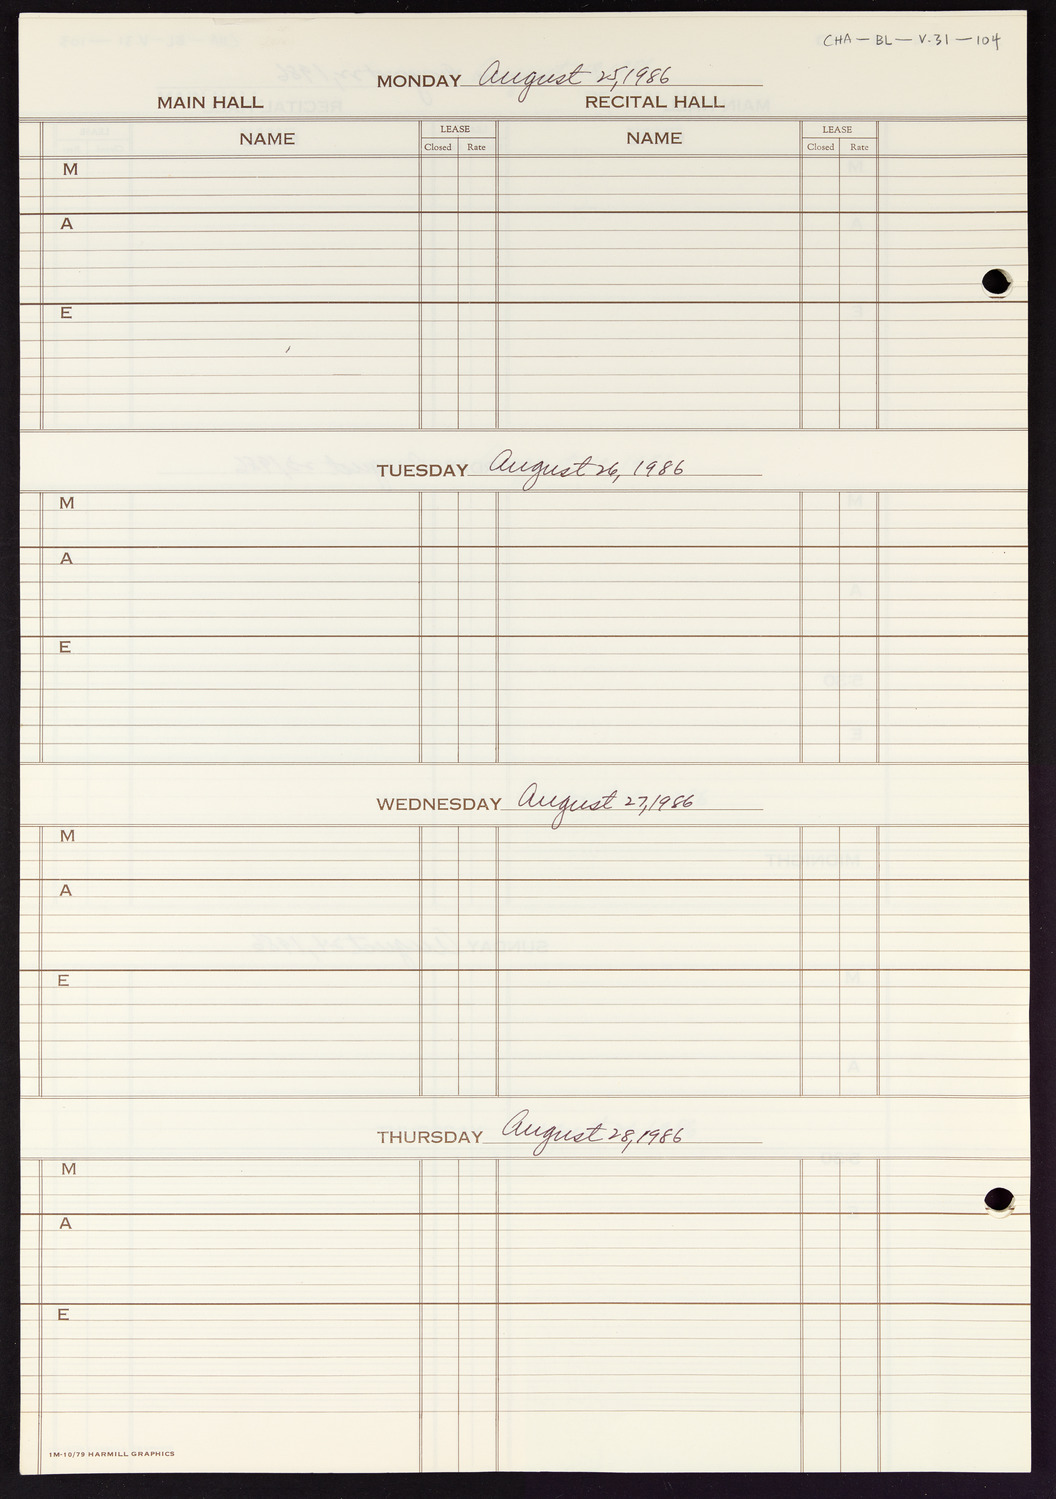 Carnegie Hall Booking Ledger, volume 31, page 104